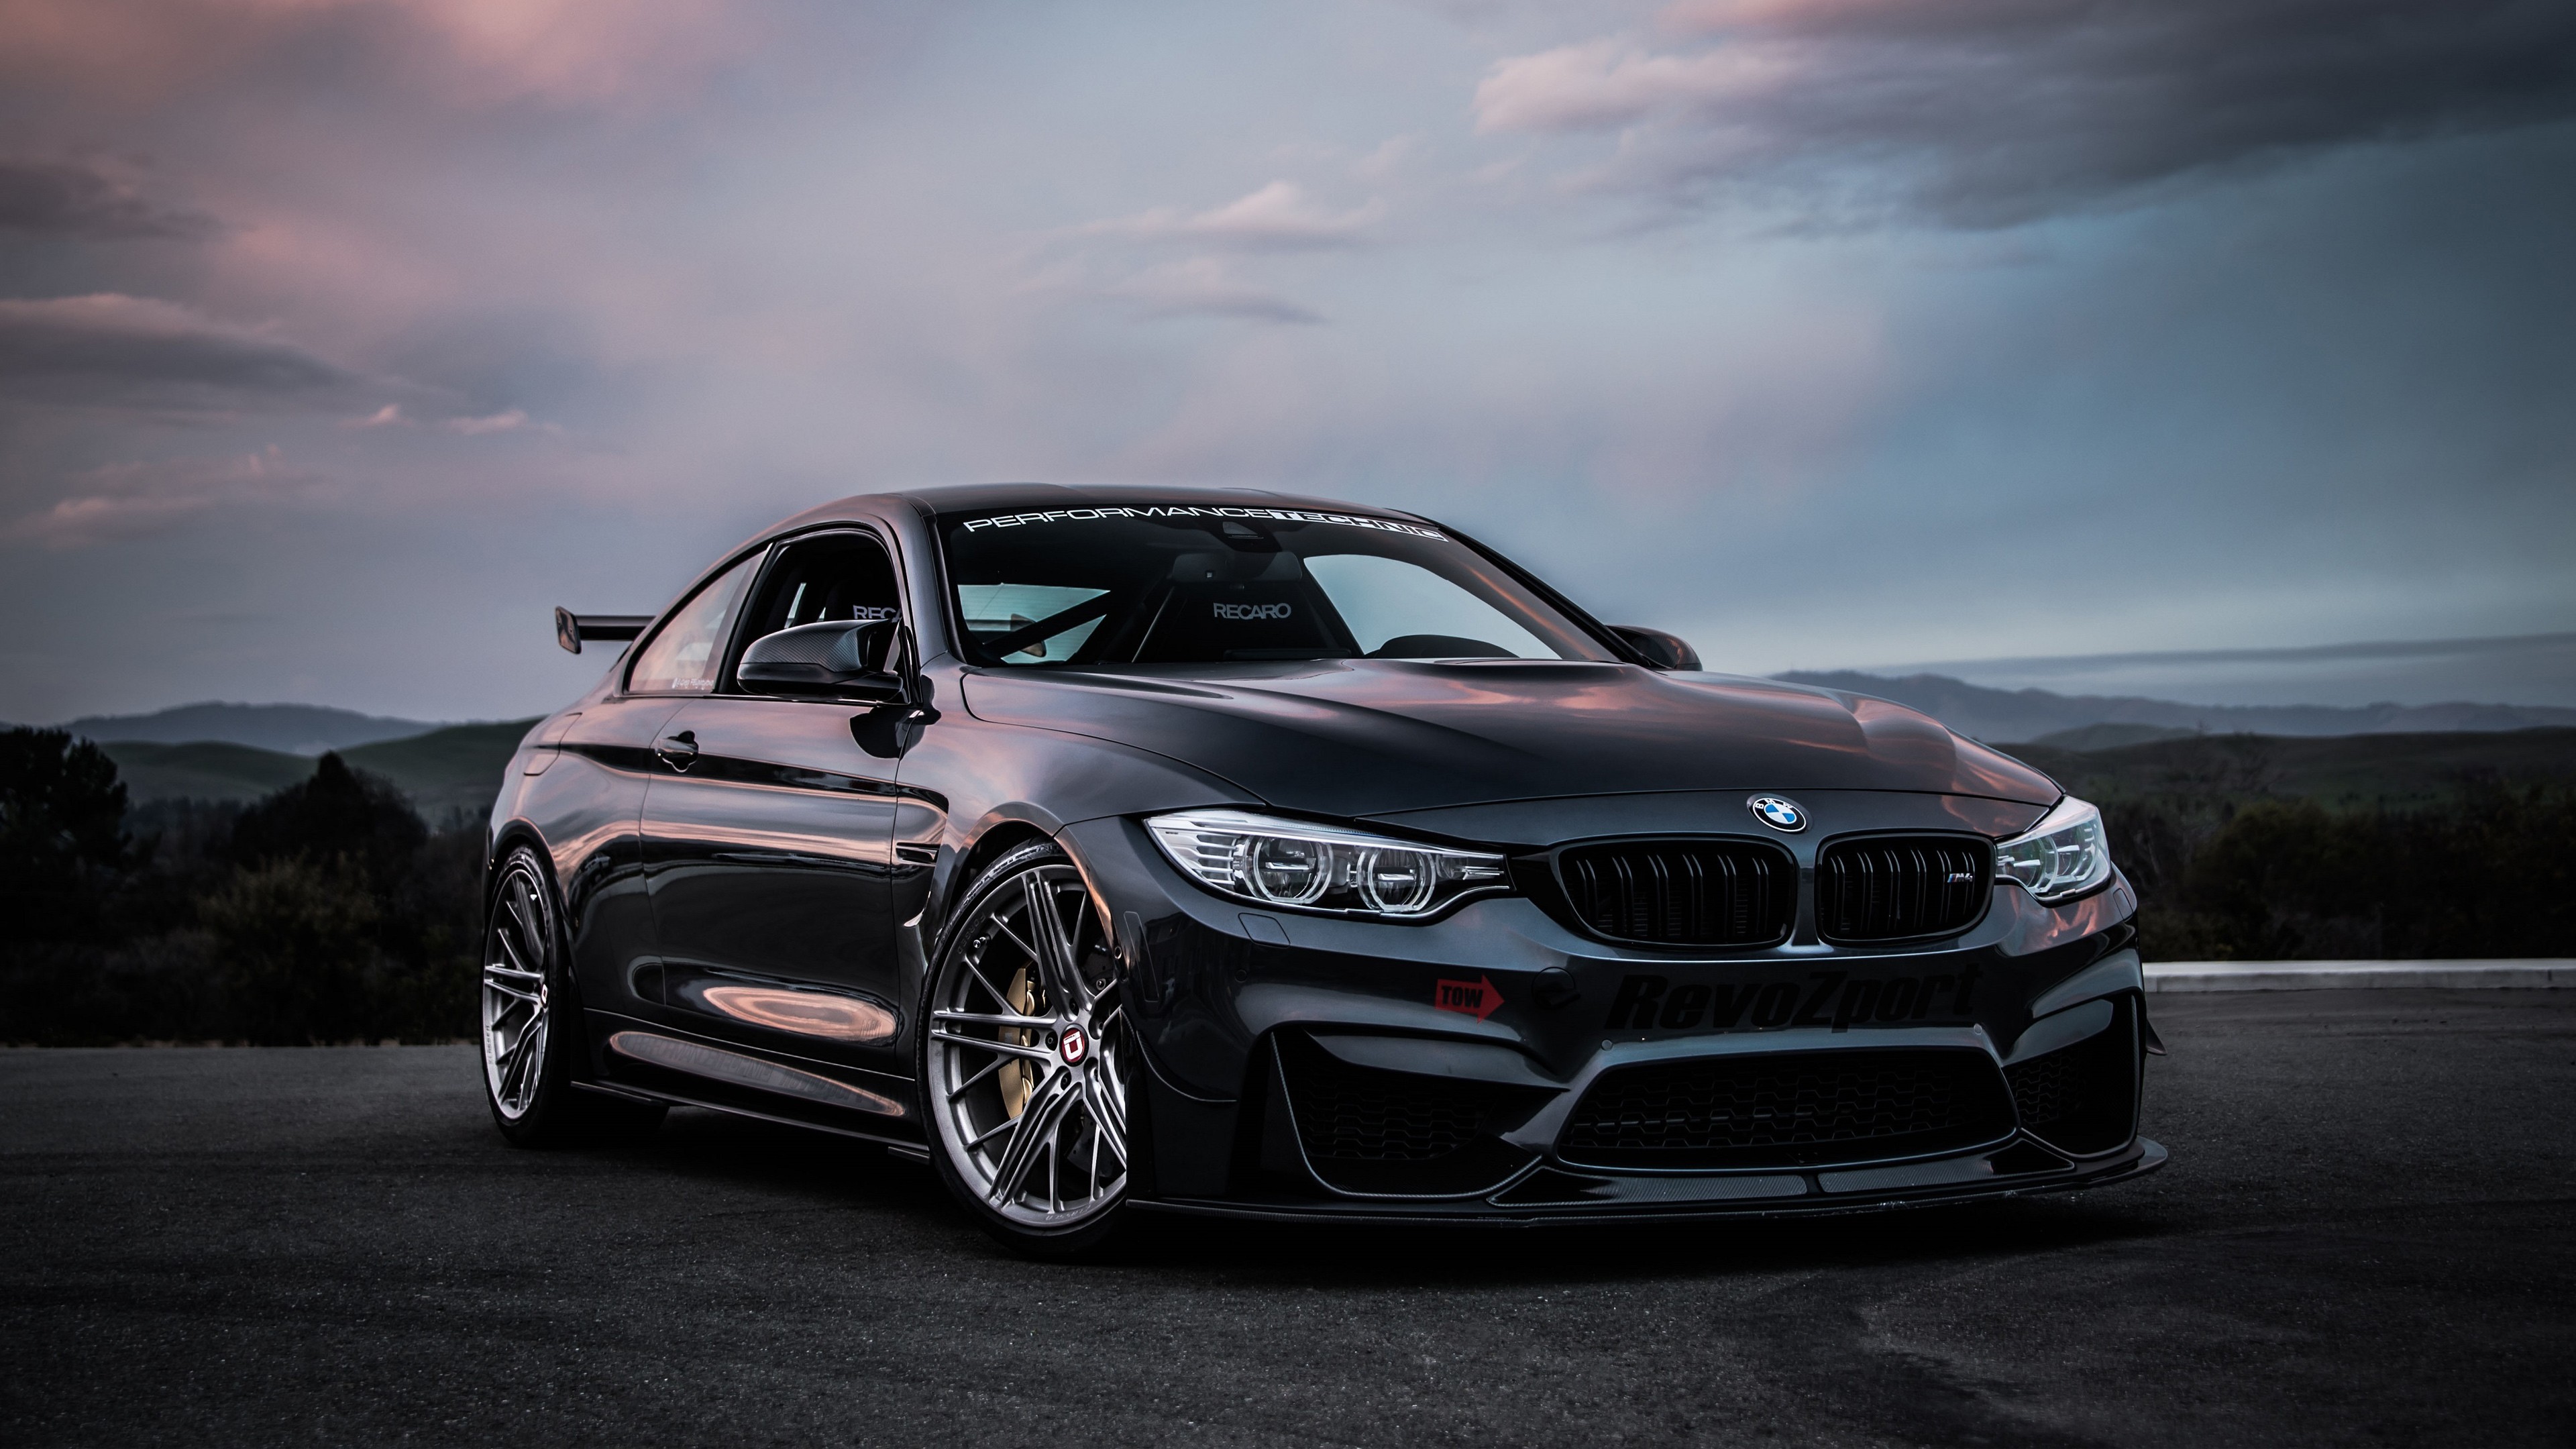 Black Bmw m 3 Coupe. Wallpaper in 3840x2160 Resolution